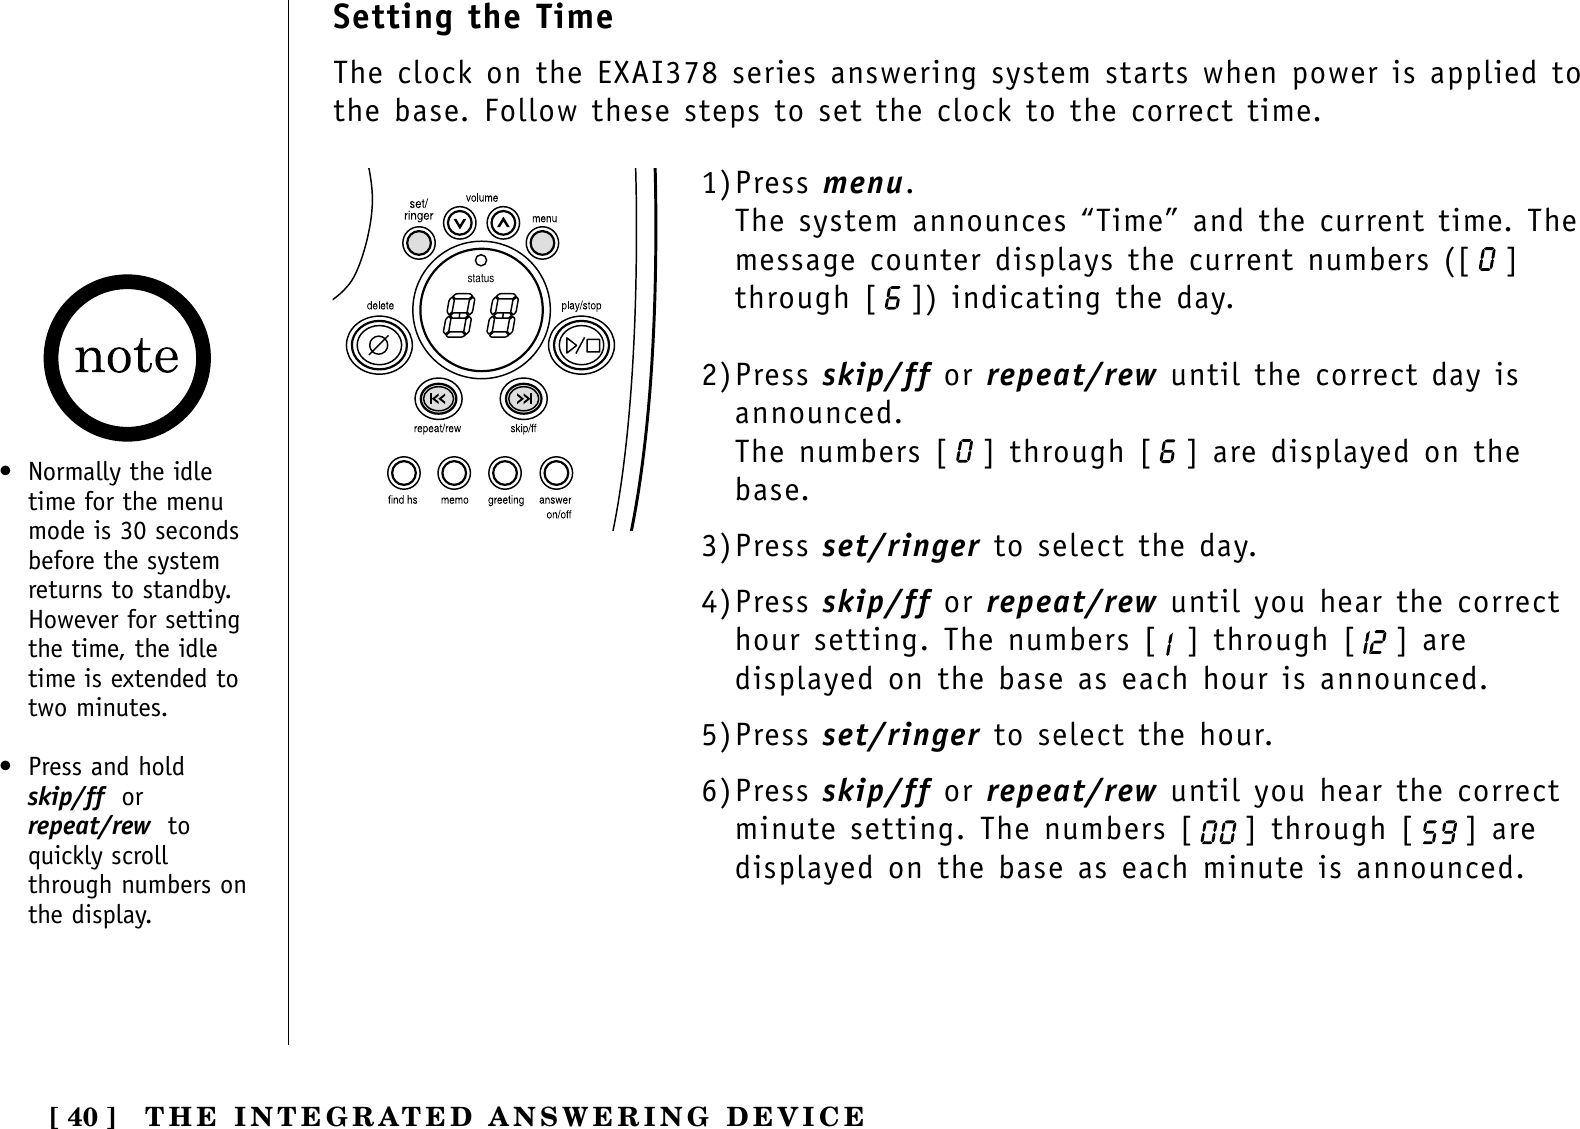 THE INTEGRATED ANSWERING DEVICE[ 40 ]Setting the TimeThe clock on the EXAI378 series answering system starts when power is applied tothe base. Follow these steps to set the clock to the correct time.status1)Press menu.The system announces “Time” and the current time. Themessage counter displays the current numbers ([ ]through [ ]) indicating the day.2)Press skip/ff or repeat/rew until the correct day isannounced.The numbers [ ] through [ ] are displayed on thebase.3)Press set/ringer to select the day.4)Press skip/ff or repeat/rew until you hear the correcthour setting. The numbers [ ] through [ ] aredisplayed on the base as each hour is announced.5)Press set/ringer to select the hour.6)Press skip/ff or repeat/rew until you hear the correctminute setting. The numbers [ ] through [ ] aredisplayed on the base as each minute is announced.•  Normally the idletime for the menumode is 30 secondsbefore the systemreturns to standby.However for settingthe time, the idletime is extended totwo minutes.•  Press and hold skip/ff orrepeat/rew toquickly scrollthrough numbers on the display.